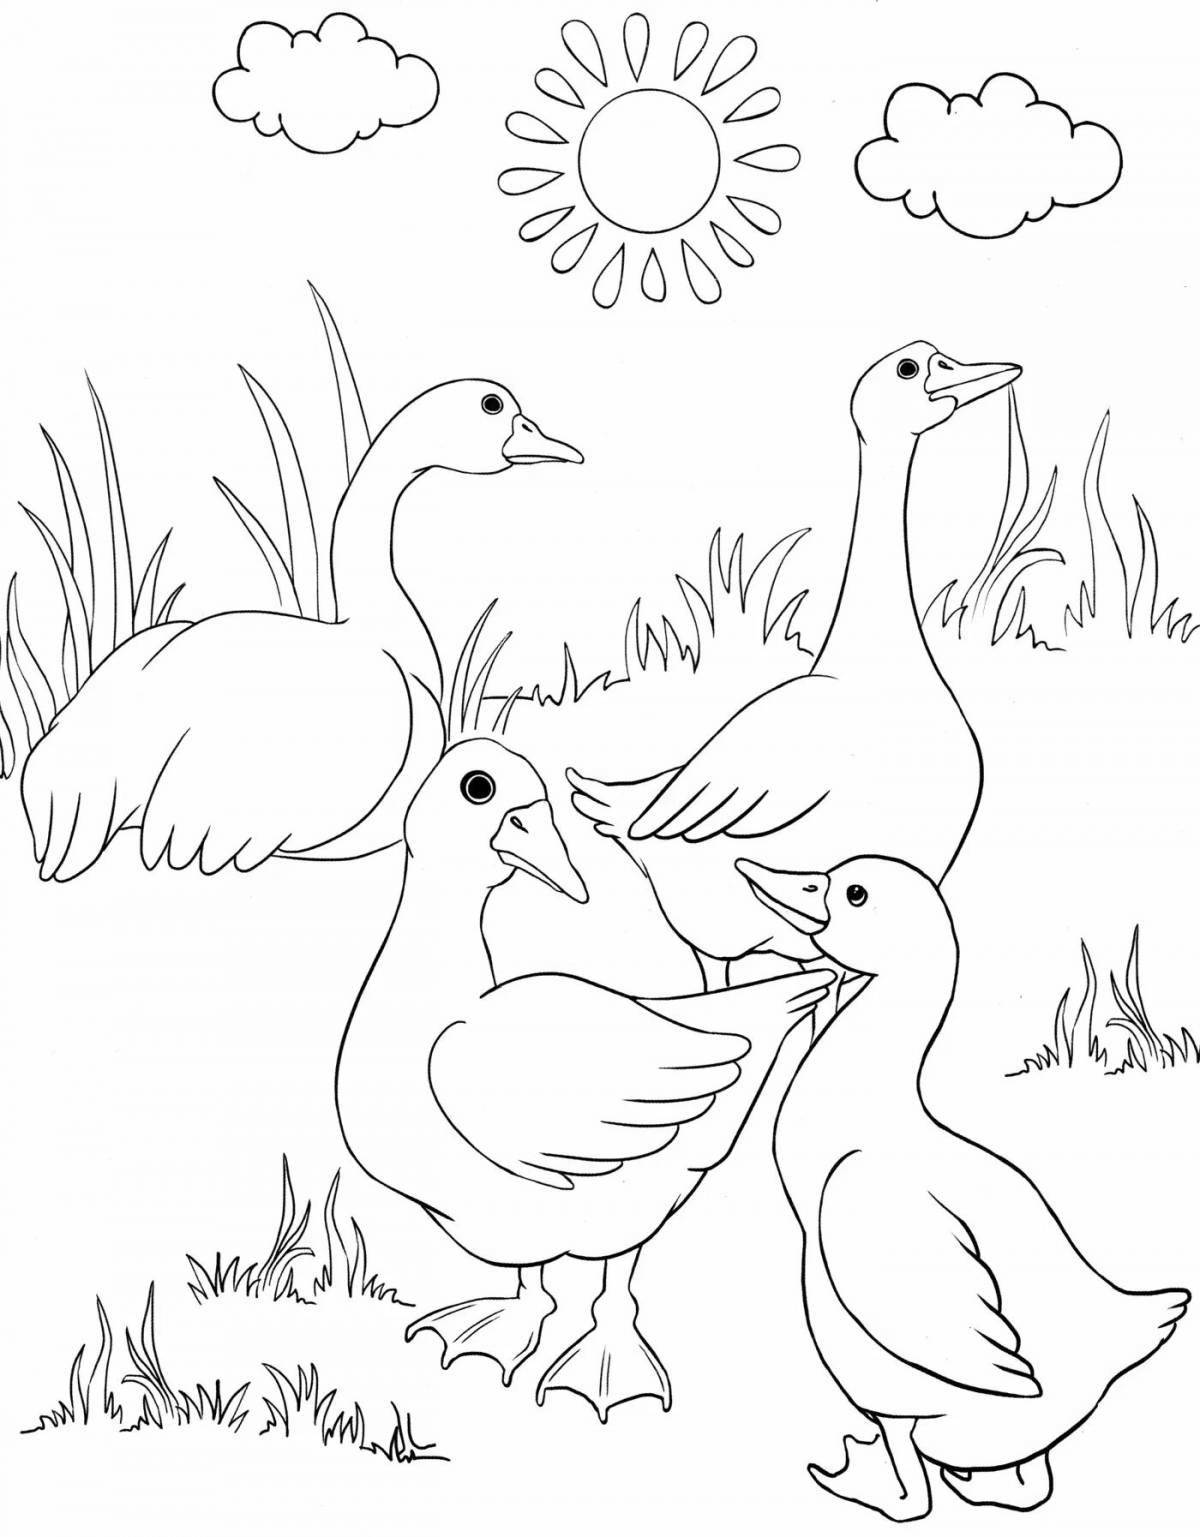 Grinning geese coloring page